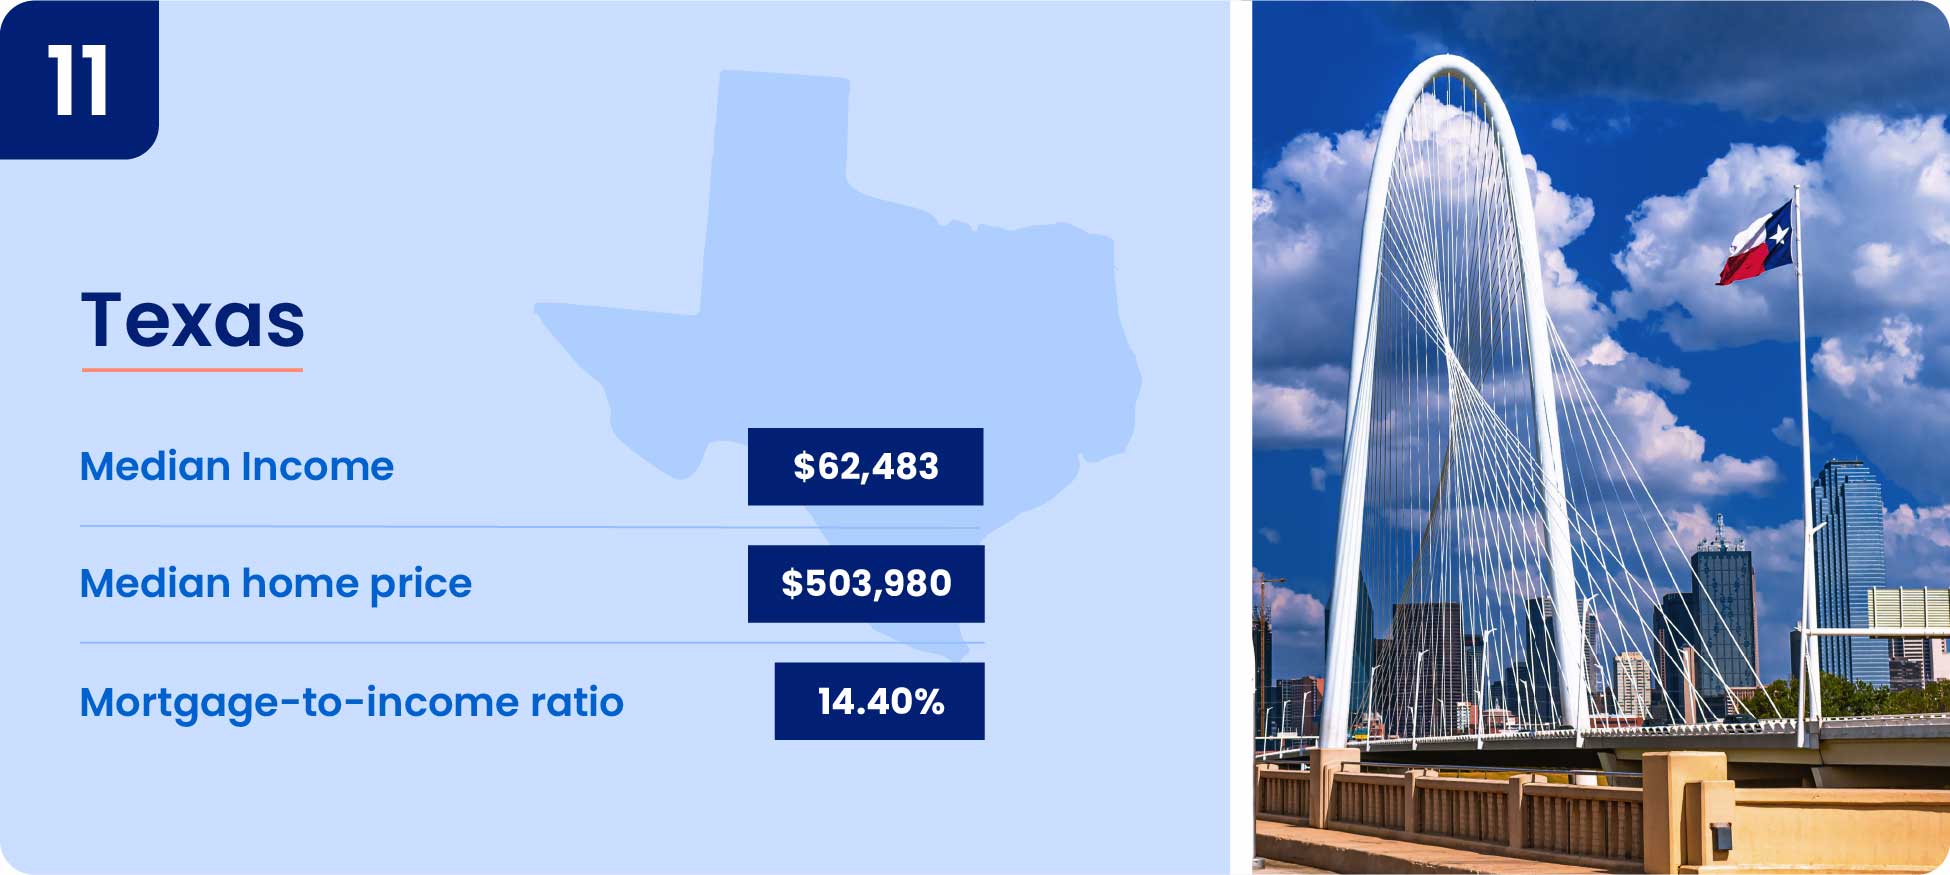 Image shows why one of the cheapest states to buy a house is Texas.